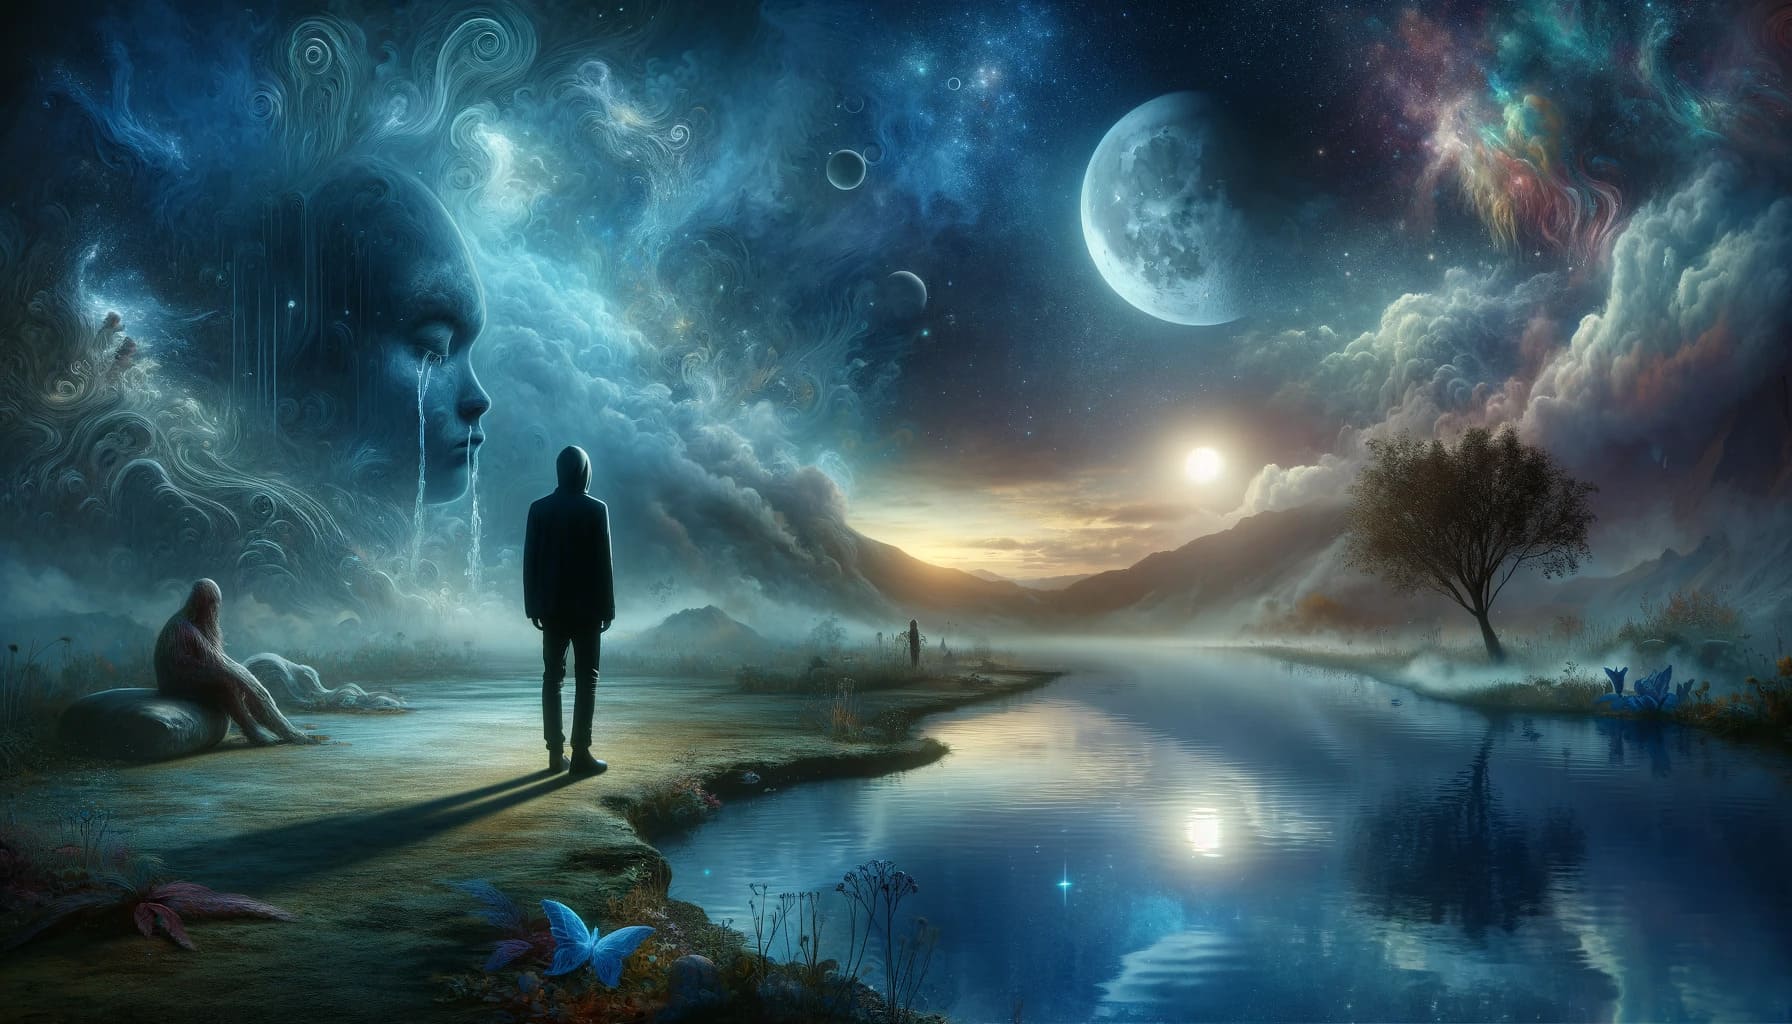 surreal landscape representing the emotional depth of dreams. In the foreground a serene pond reflects the moon symbolizing introspection and the